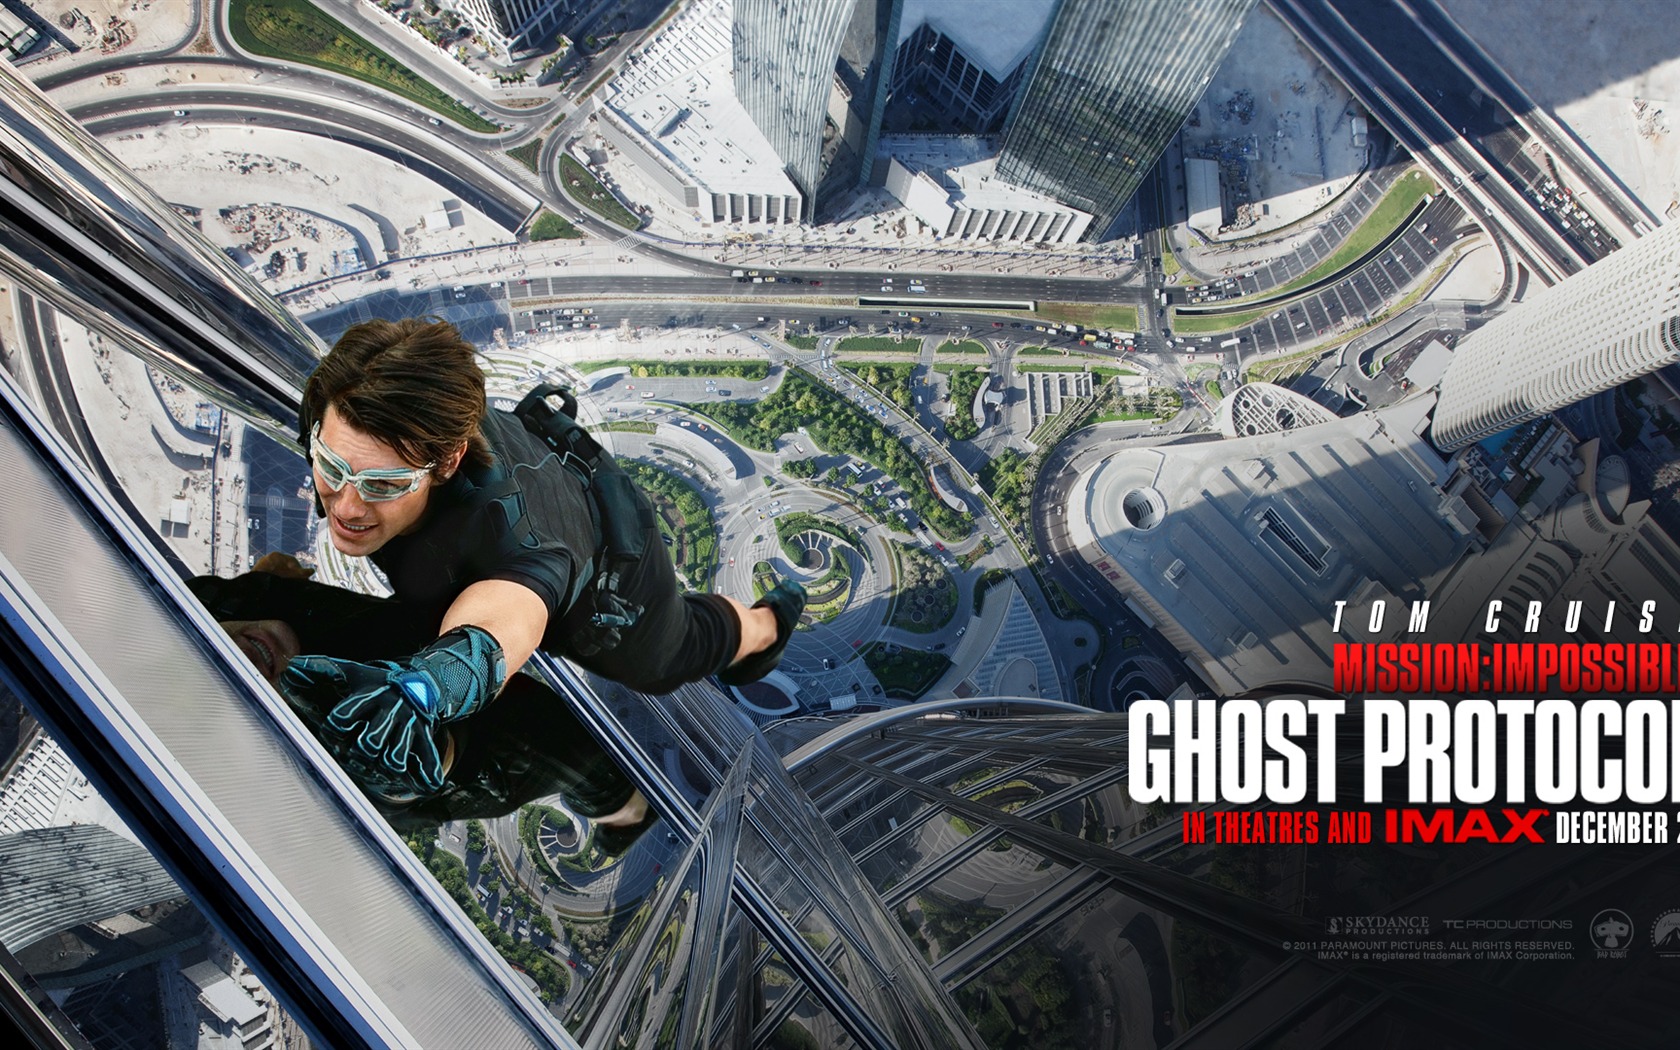 Mission: Impossible - Ghost Protocol 碟中谍4 高清壁纸10 - 1680x1050